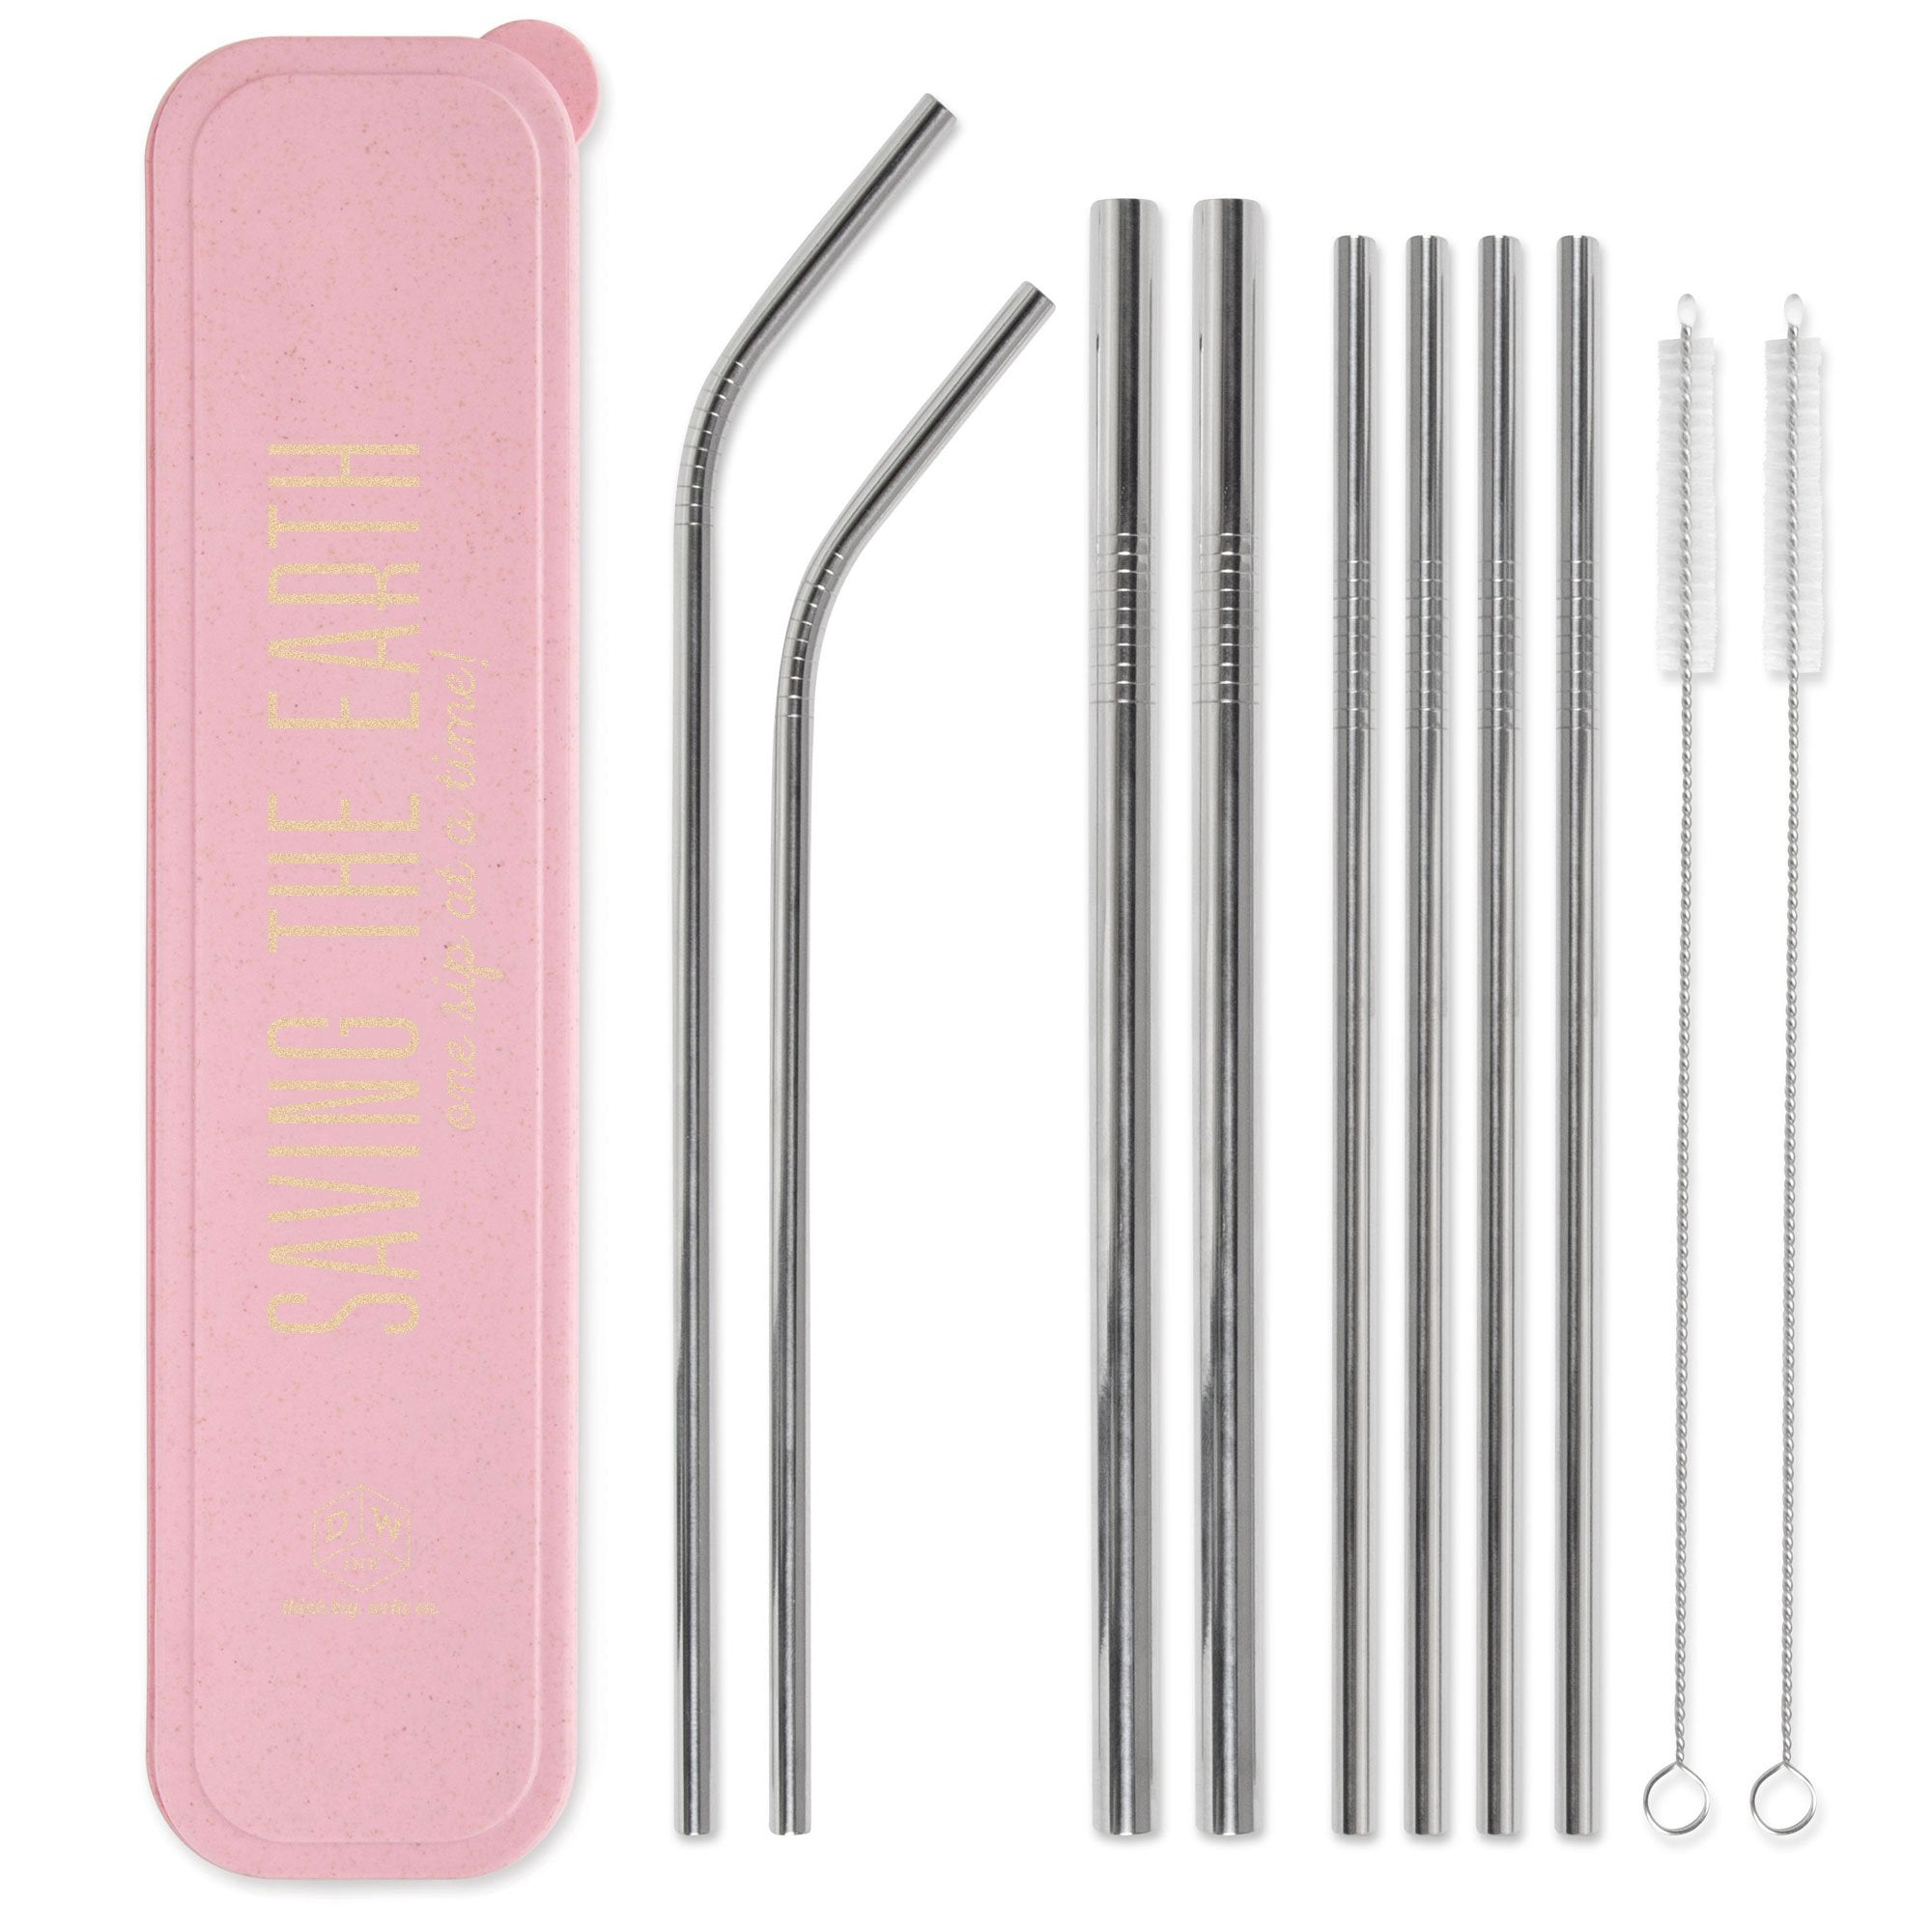 Designworks Ink Pink Saving The Earth Stainless Steel Straw Set